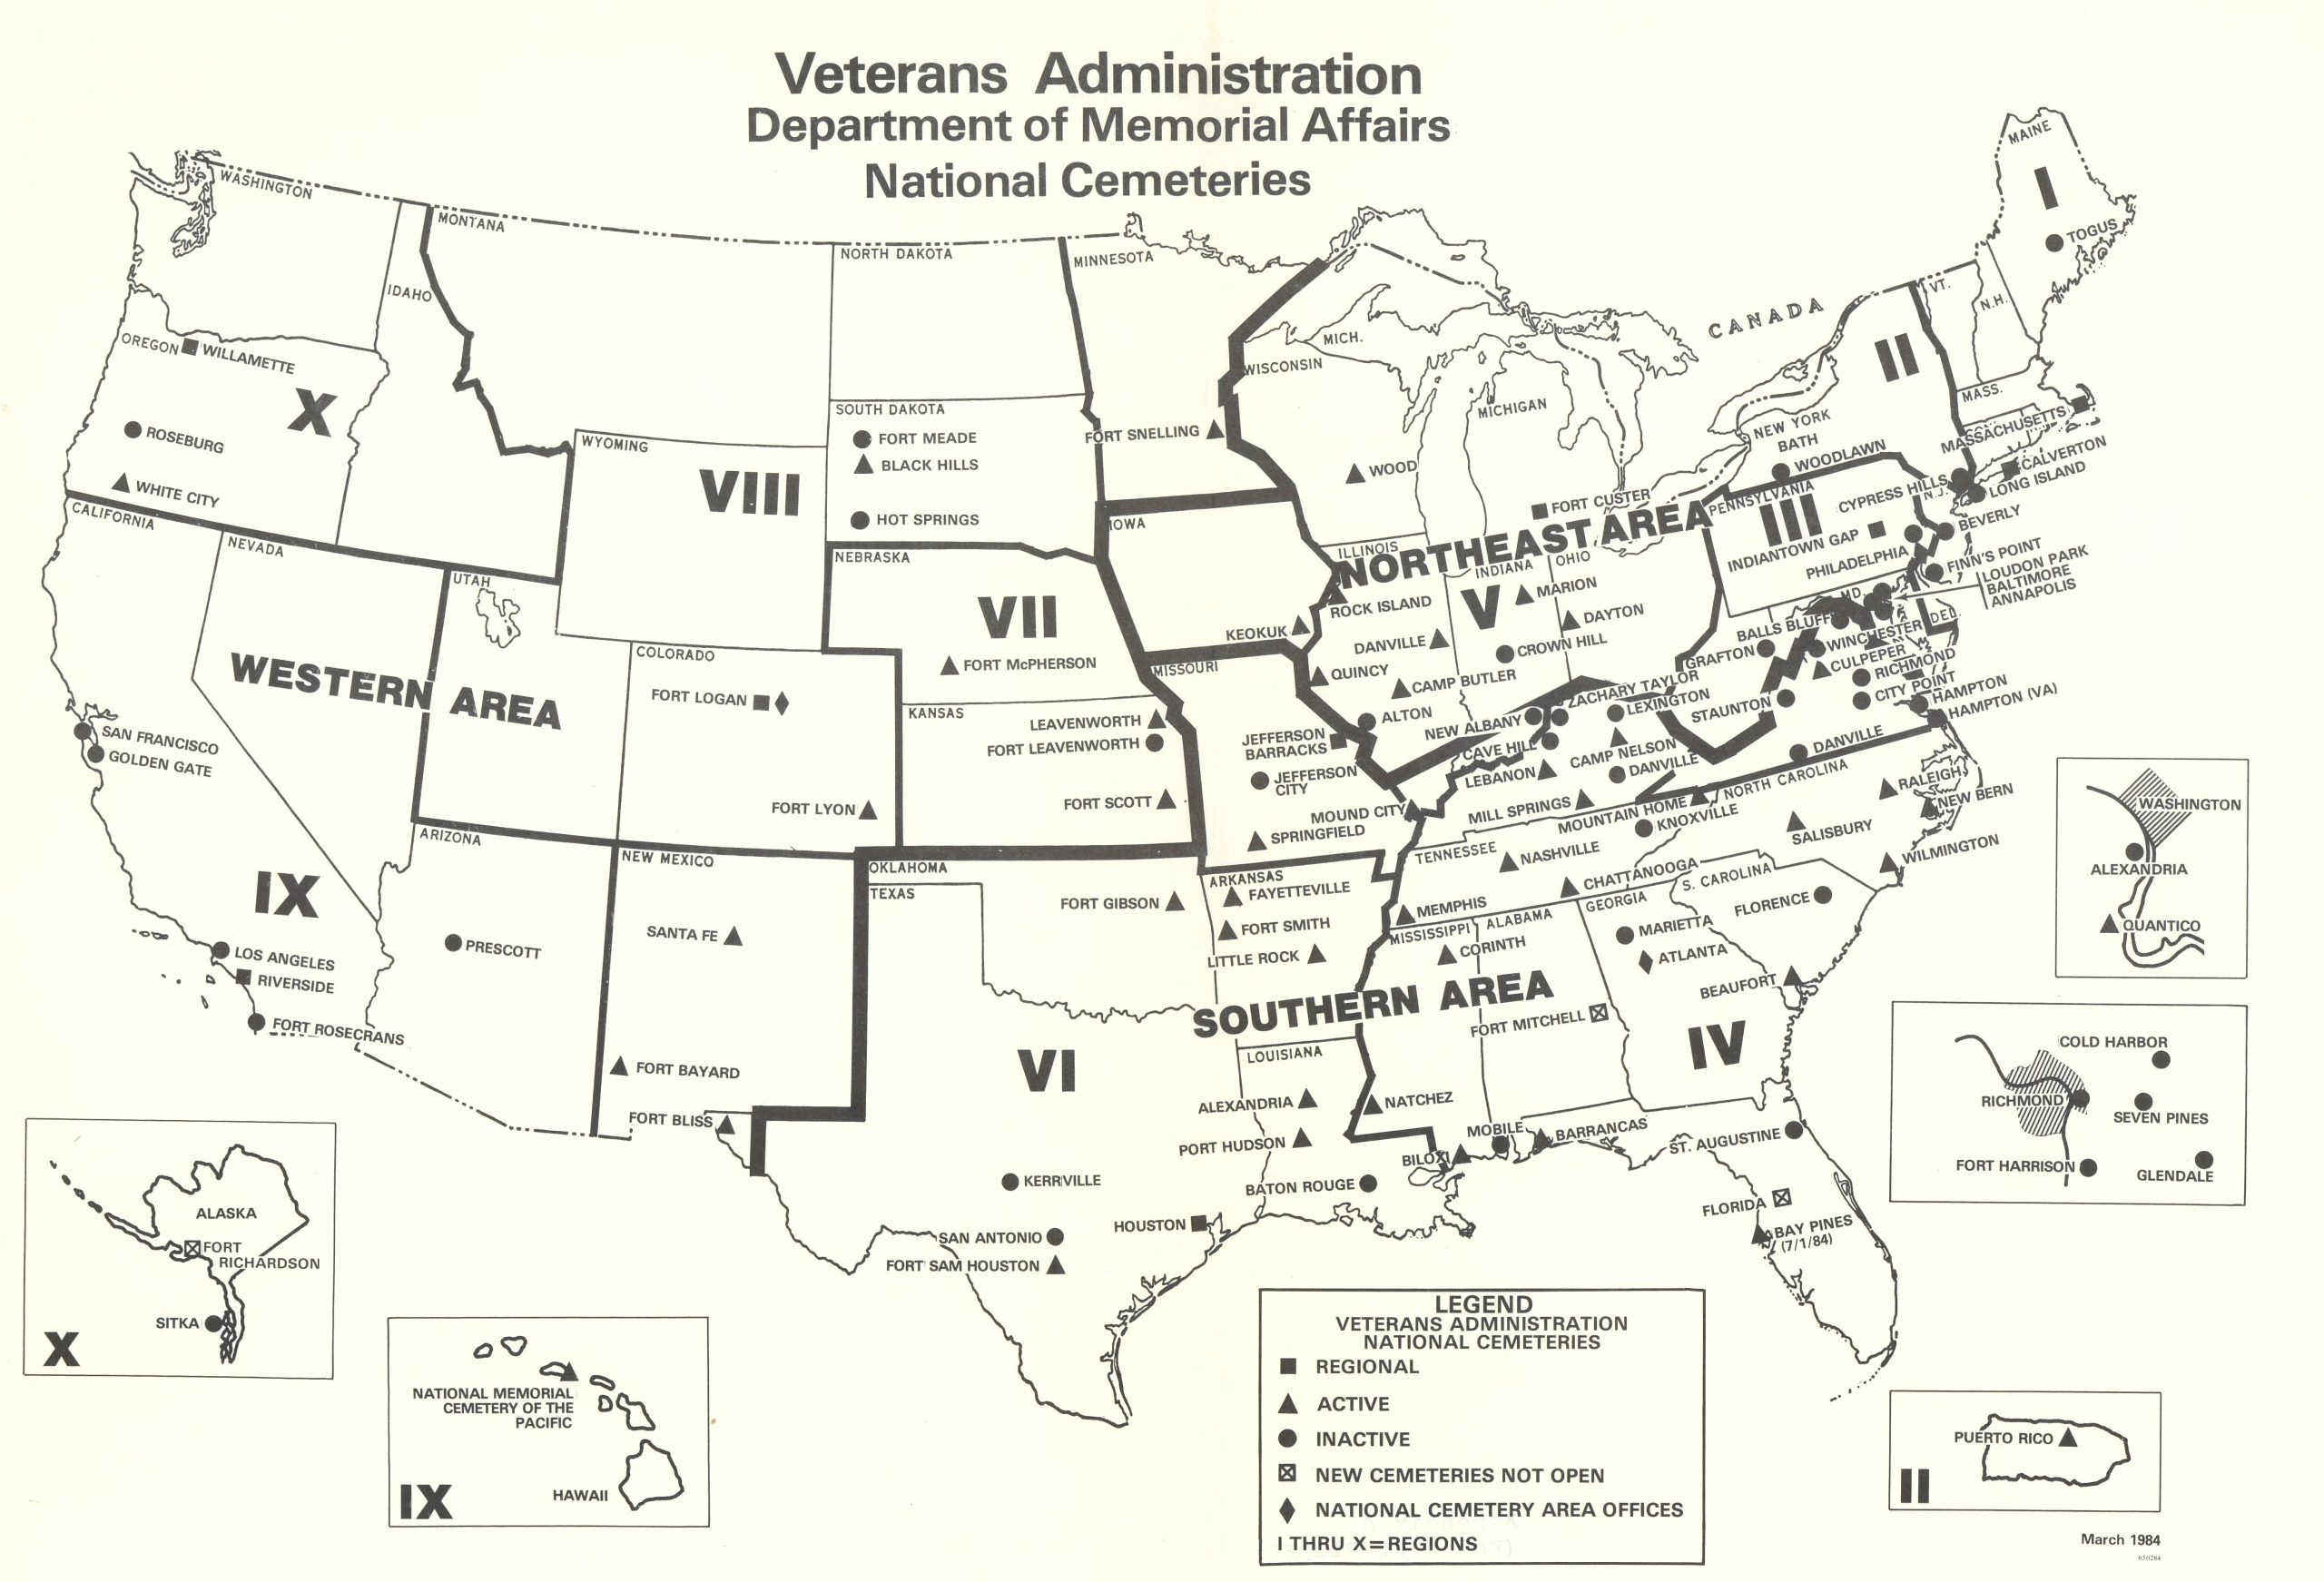 Map of the 10 standard Federal Regions, showing three NCS regional offices, and existing and proposed national cemeteries (April 1984); “regional” cemeteries are marked with a solid square. “National Cemeteries: Assessment of the Regional Cemetery Concept and Proposals for Meeting Veterans’ Future Burial Needs“ [Draft].